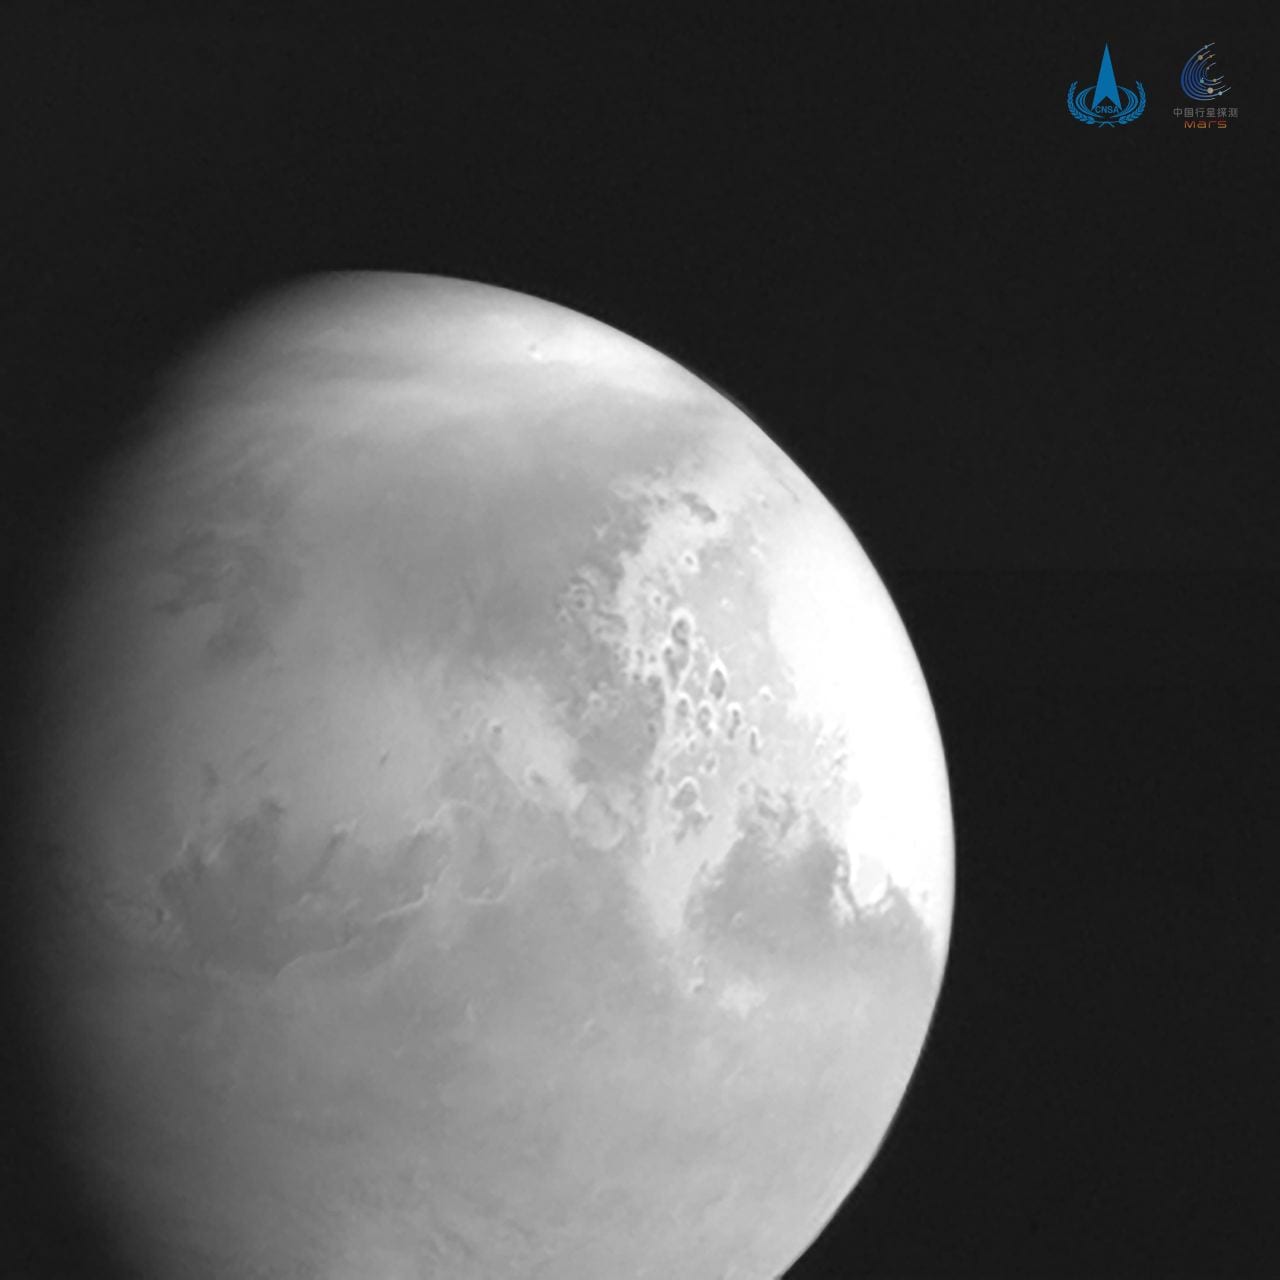 China's space probe has sent back its first image of Mars and is scheduled to touch down on the Red Planet later this year. Image Courtesy: China National Space Administration